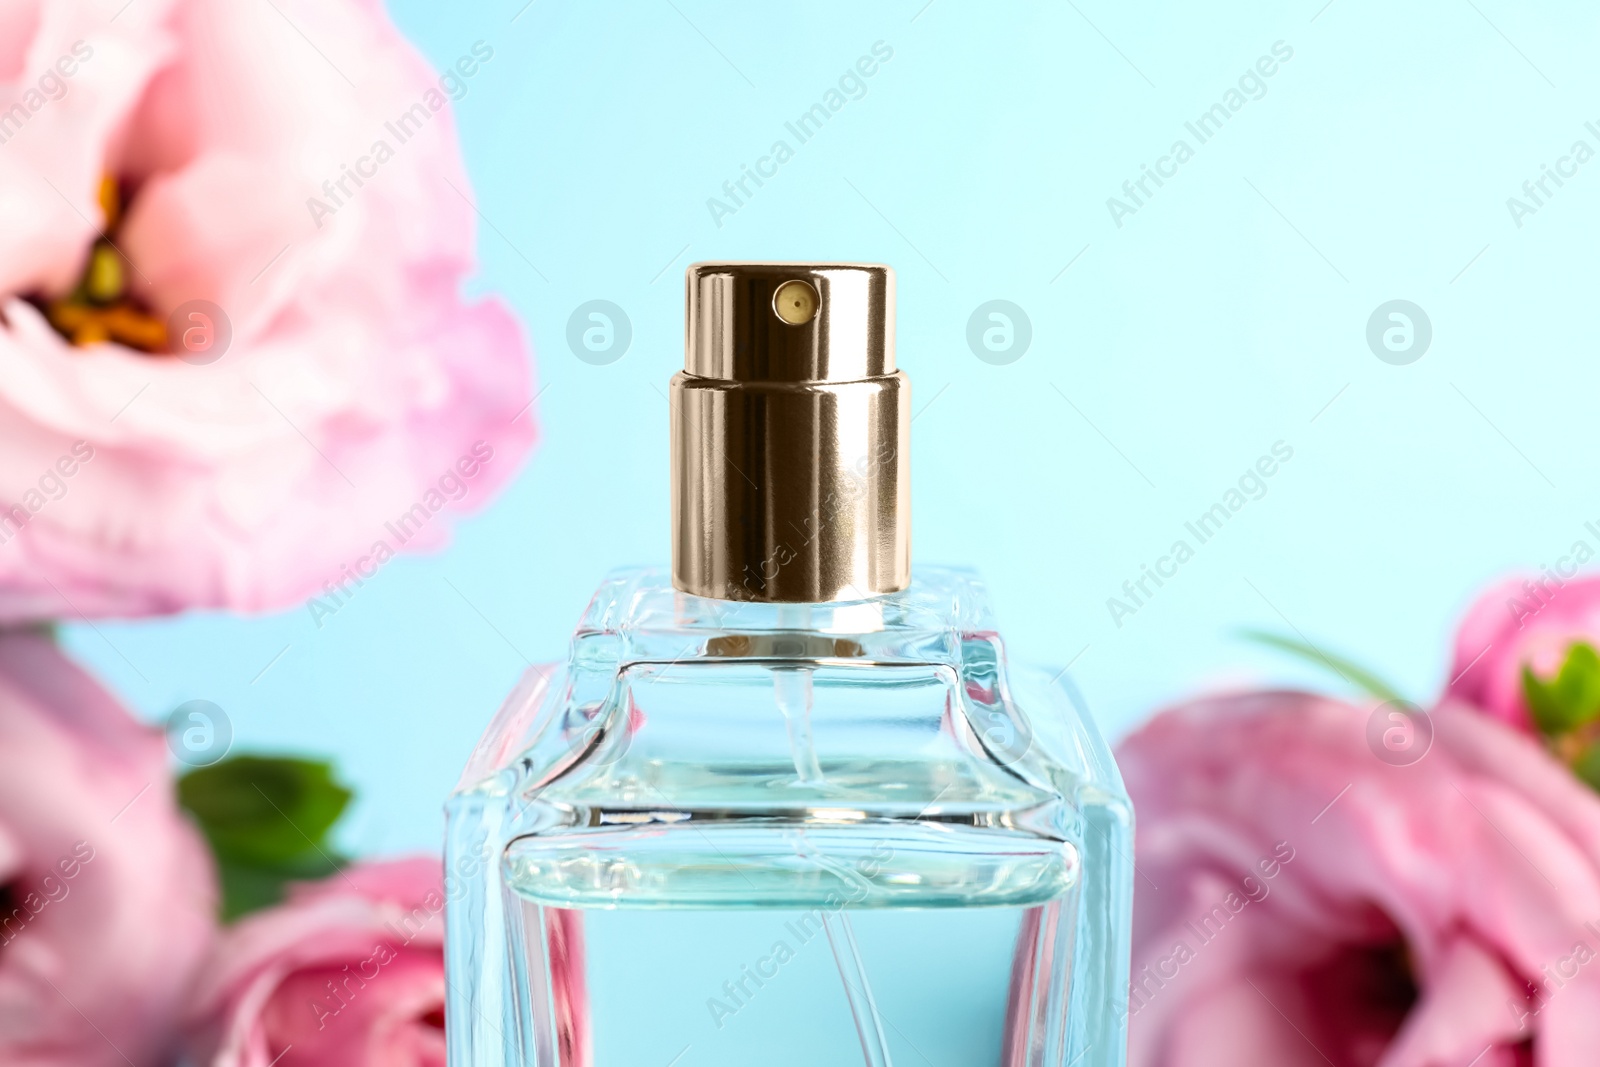 Photo of Bottle of perfume on blurred background, closeup